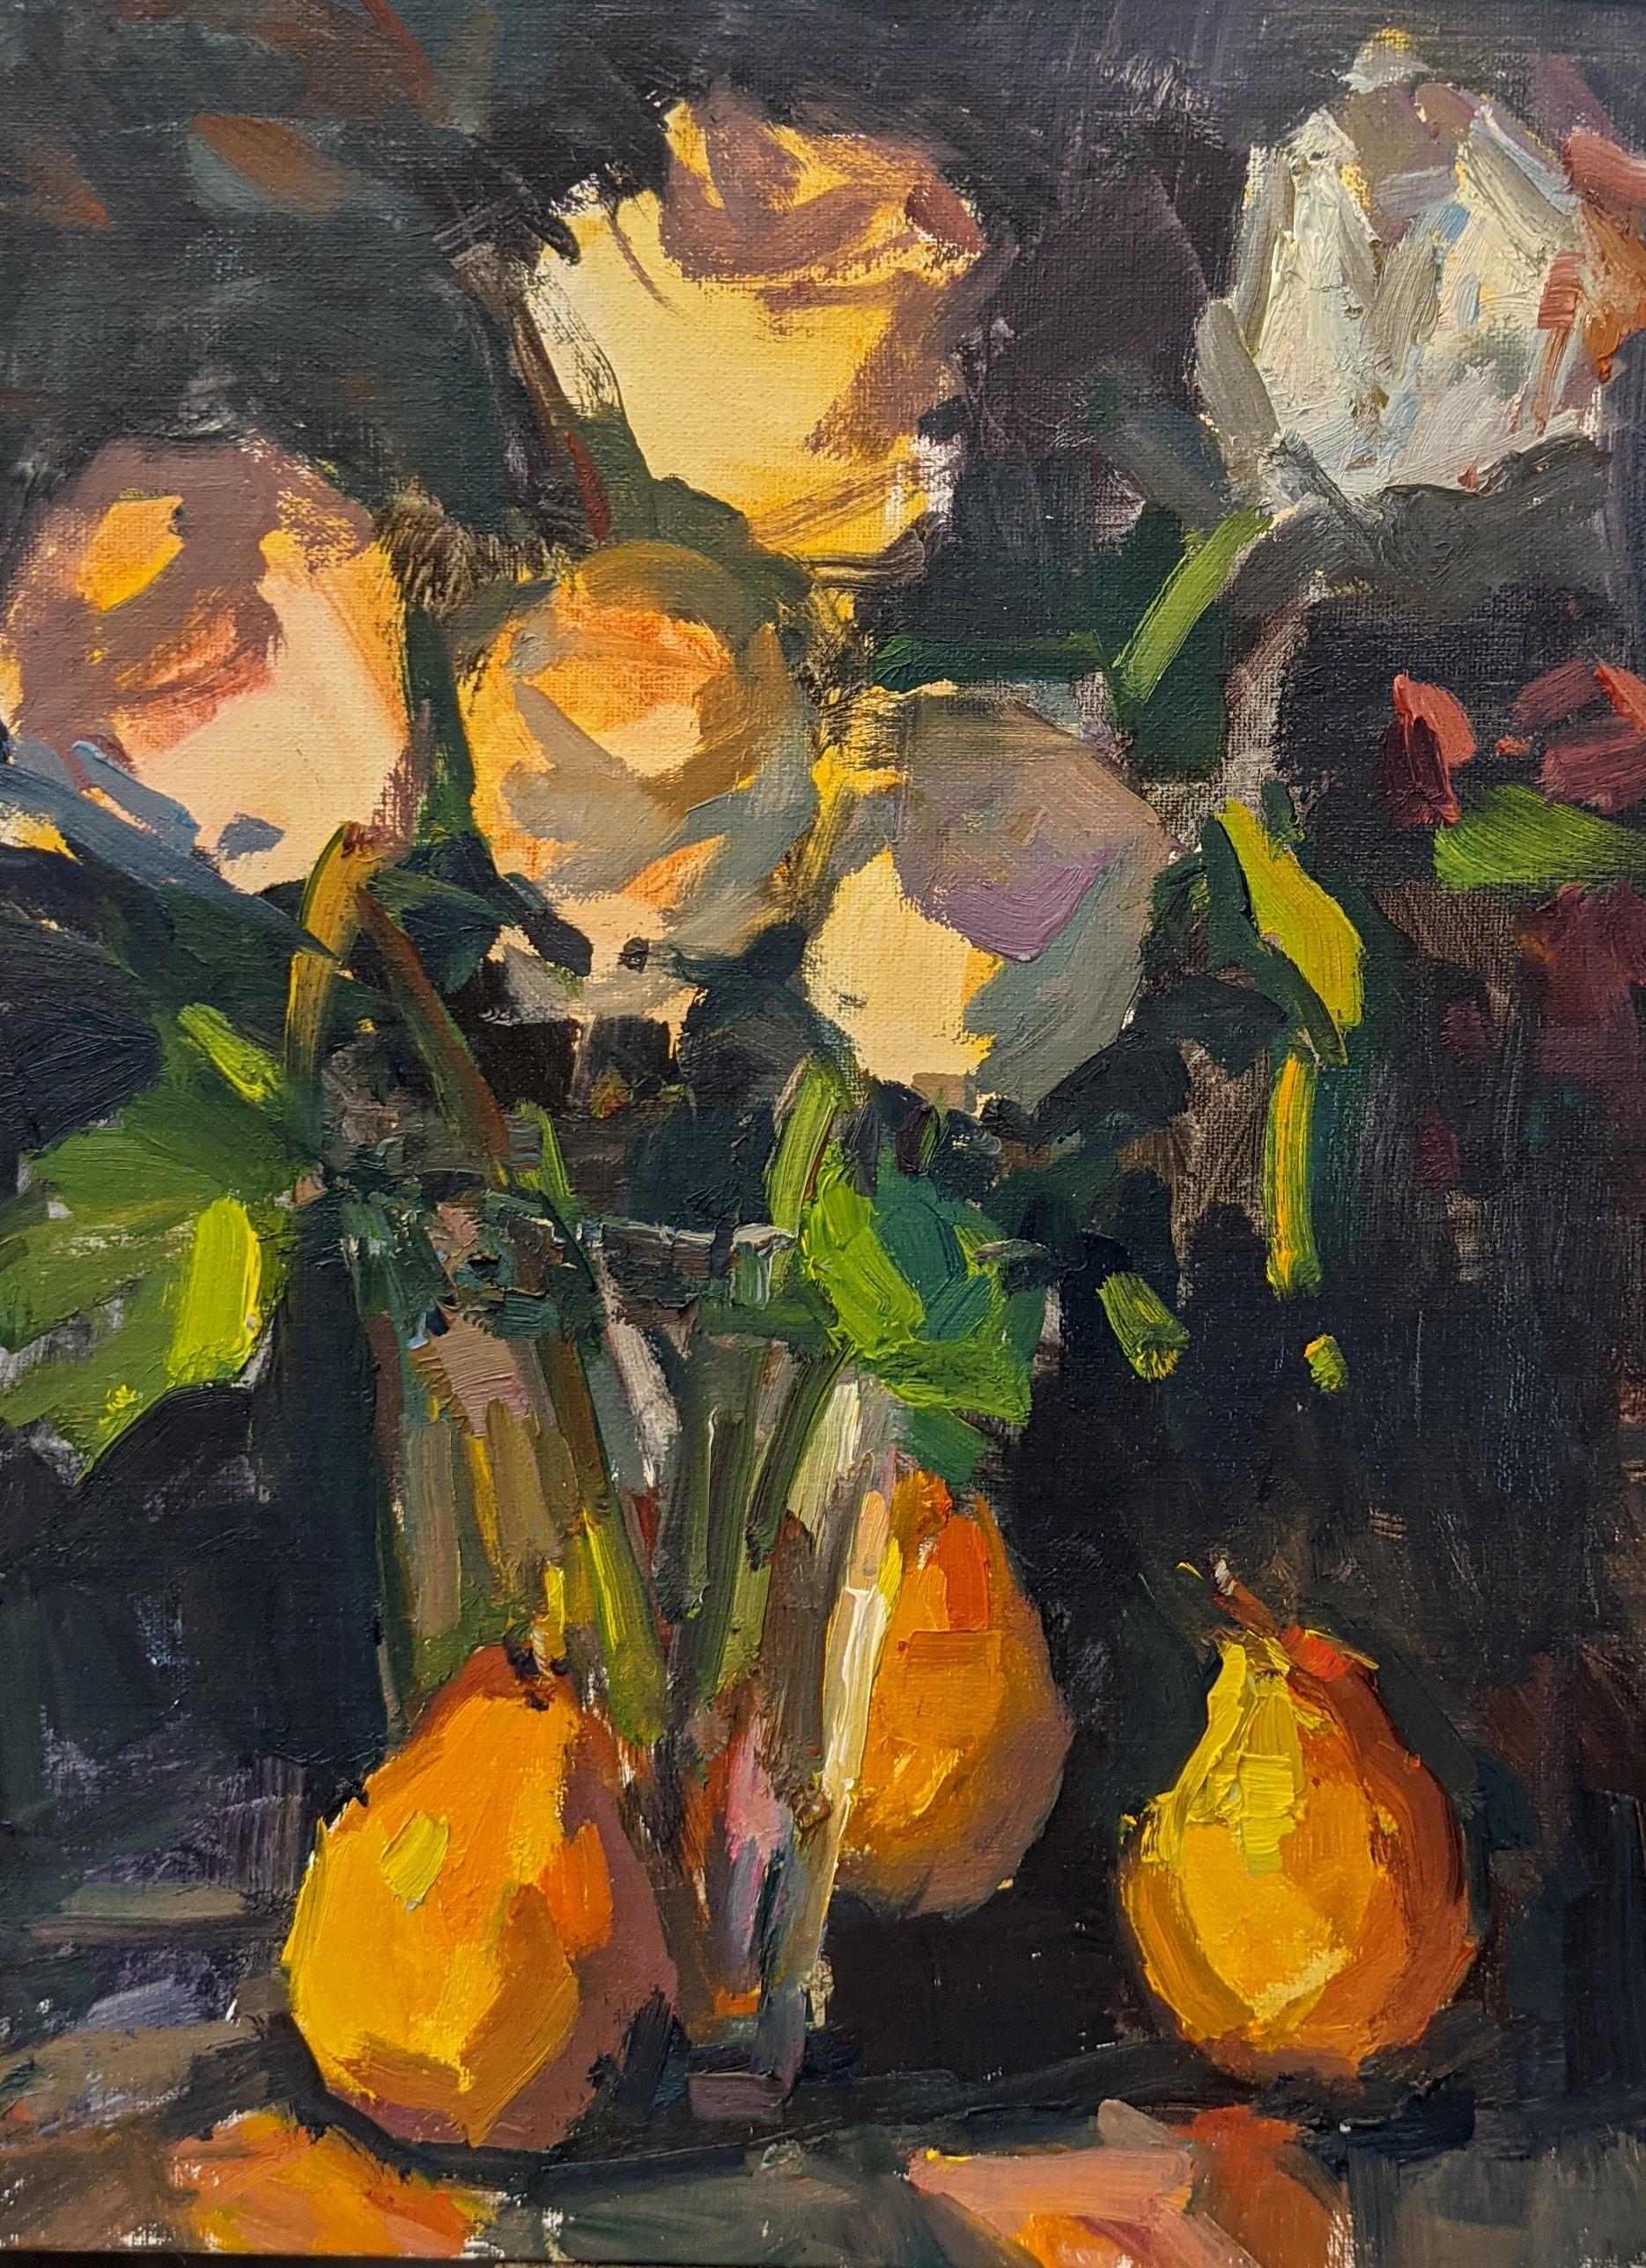 'White Roses and Pears" is a small framed Impressionist oil on board still-life painting created by American artist Millie Gosch in 2021. Featuring a palette made of green, orange, pink, blue and purple tones among others, this still-life painting